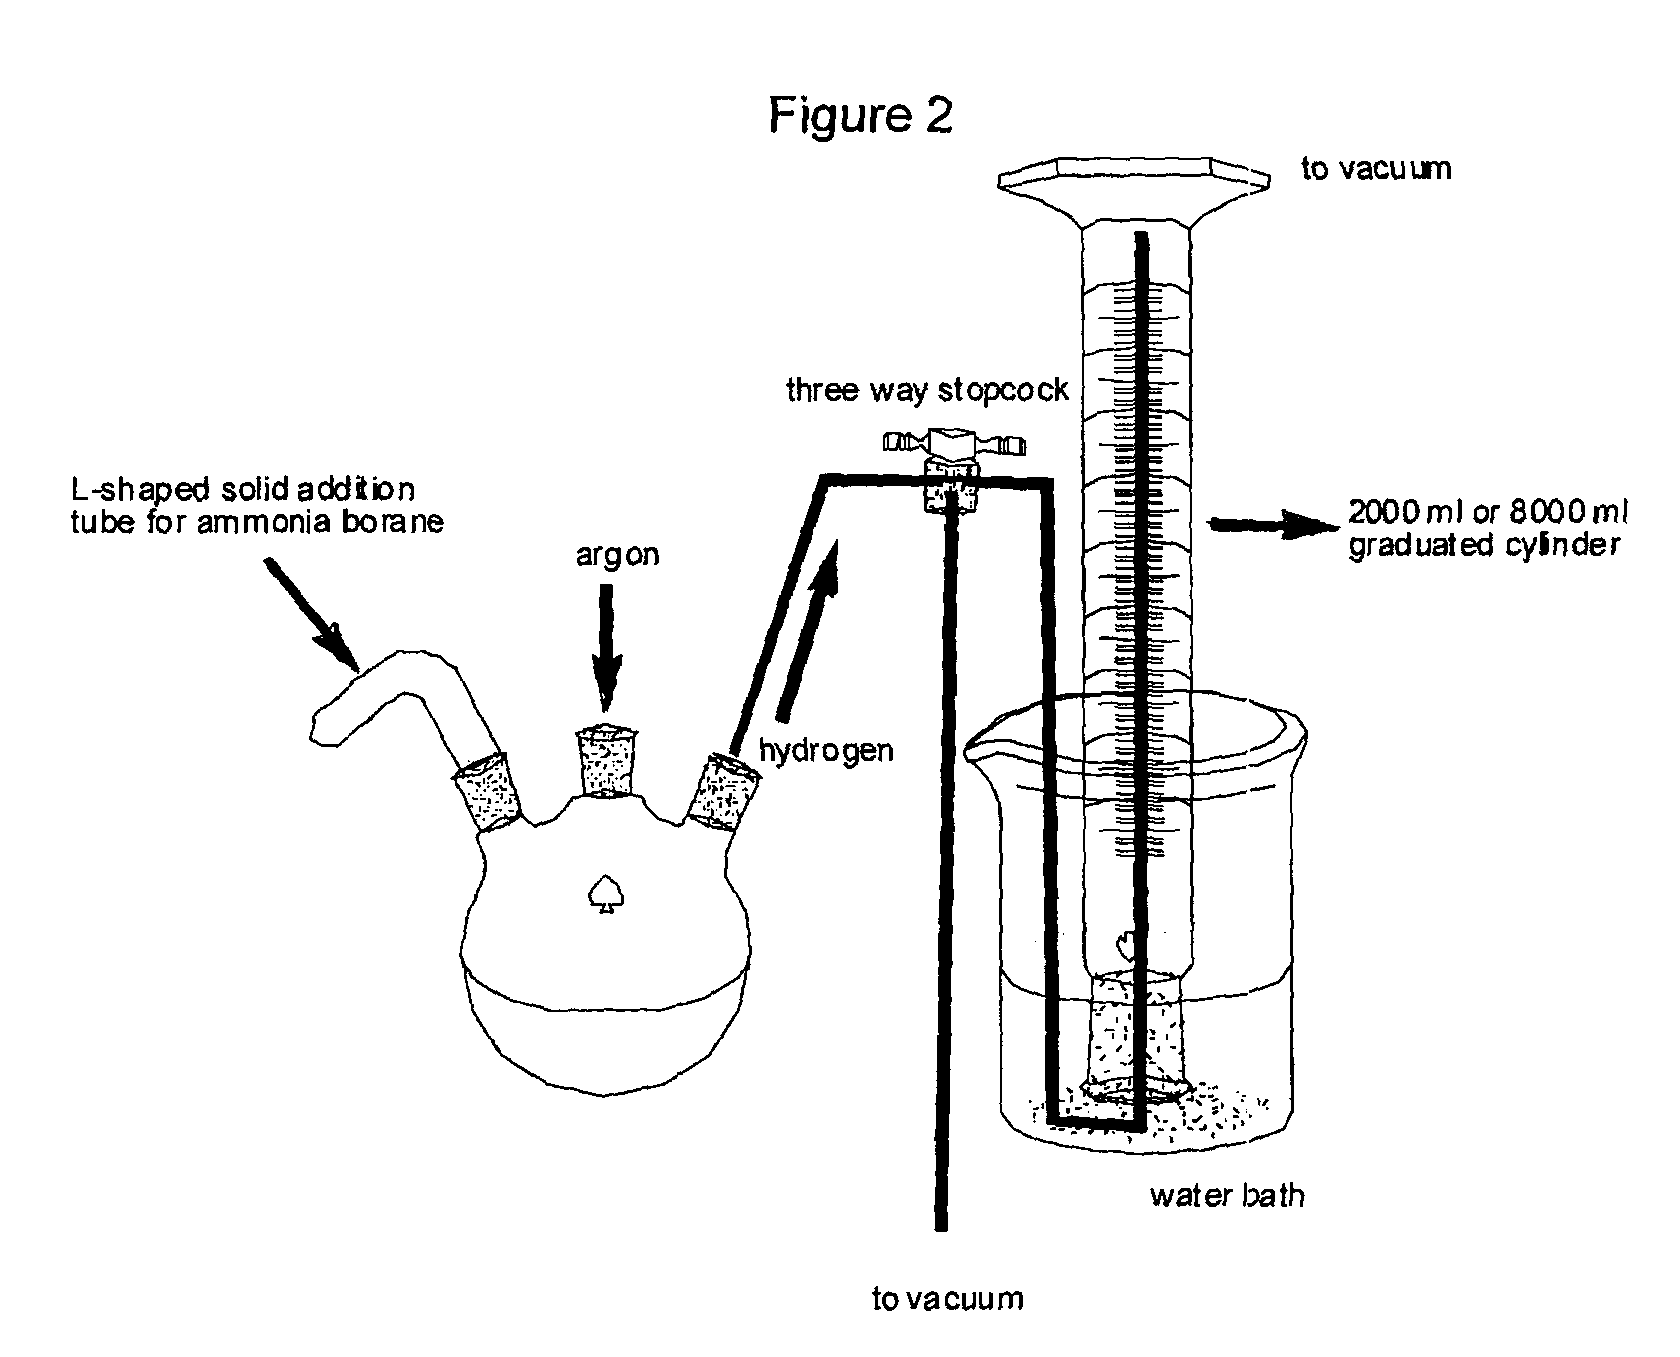 Method for the production of hydrogen from ammonia borane